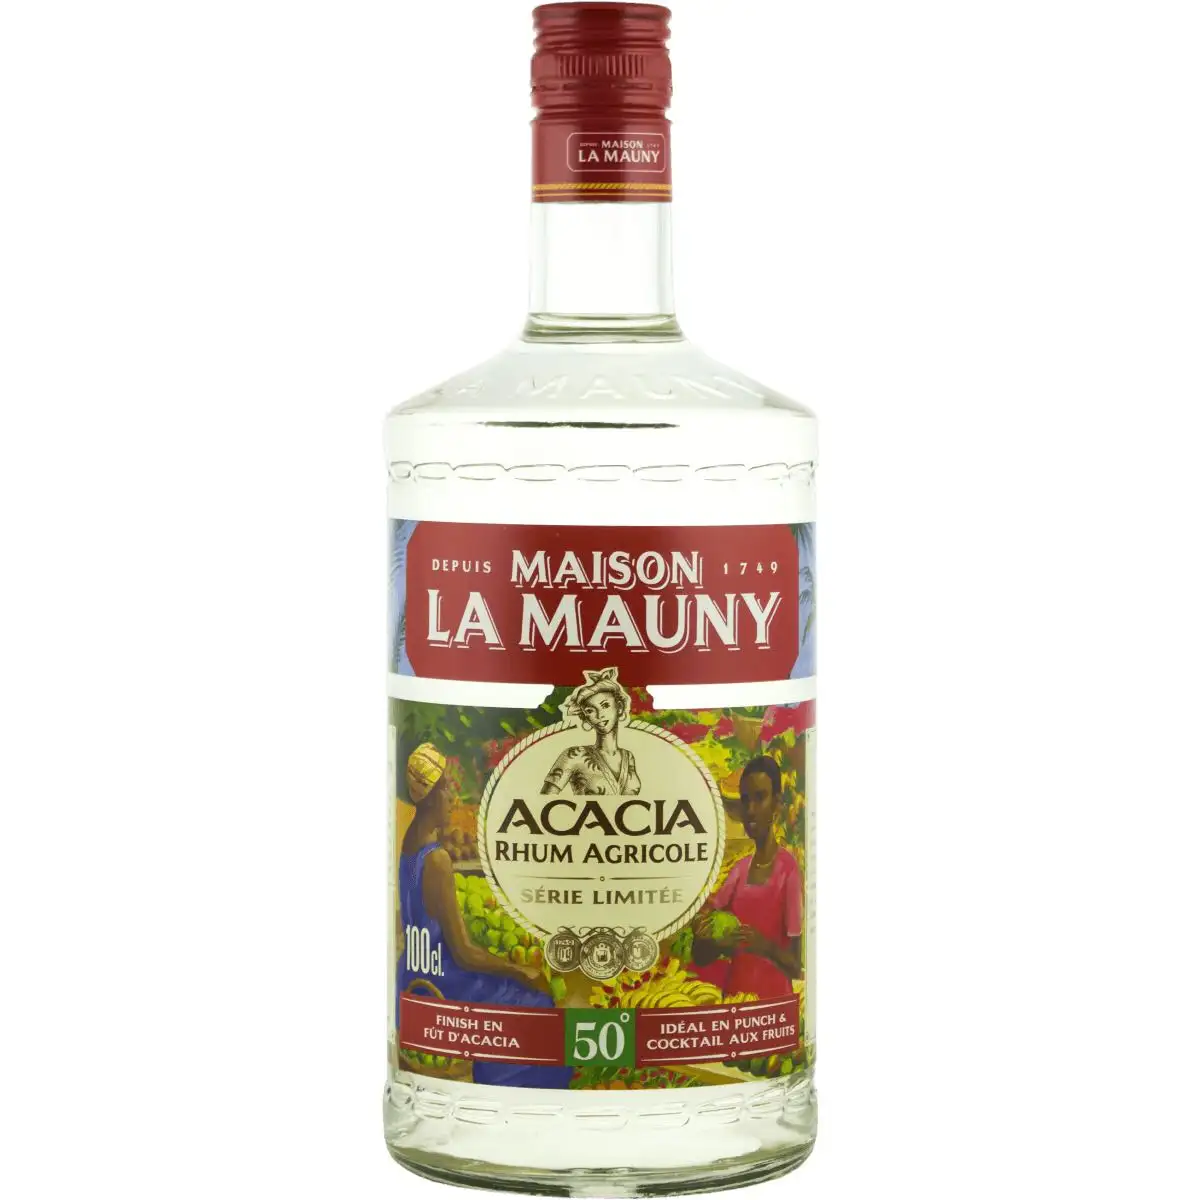 Image of the front of the bottle of the rum Acacia